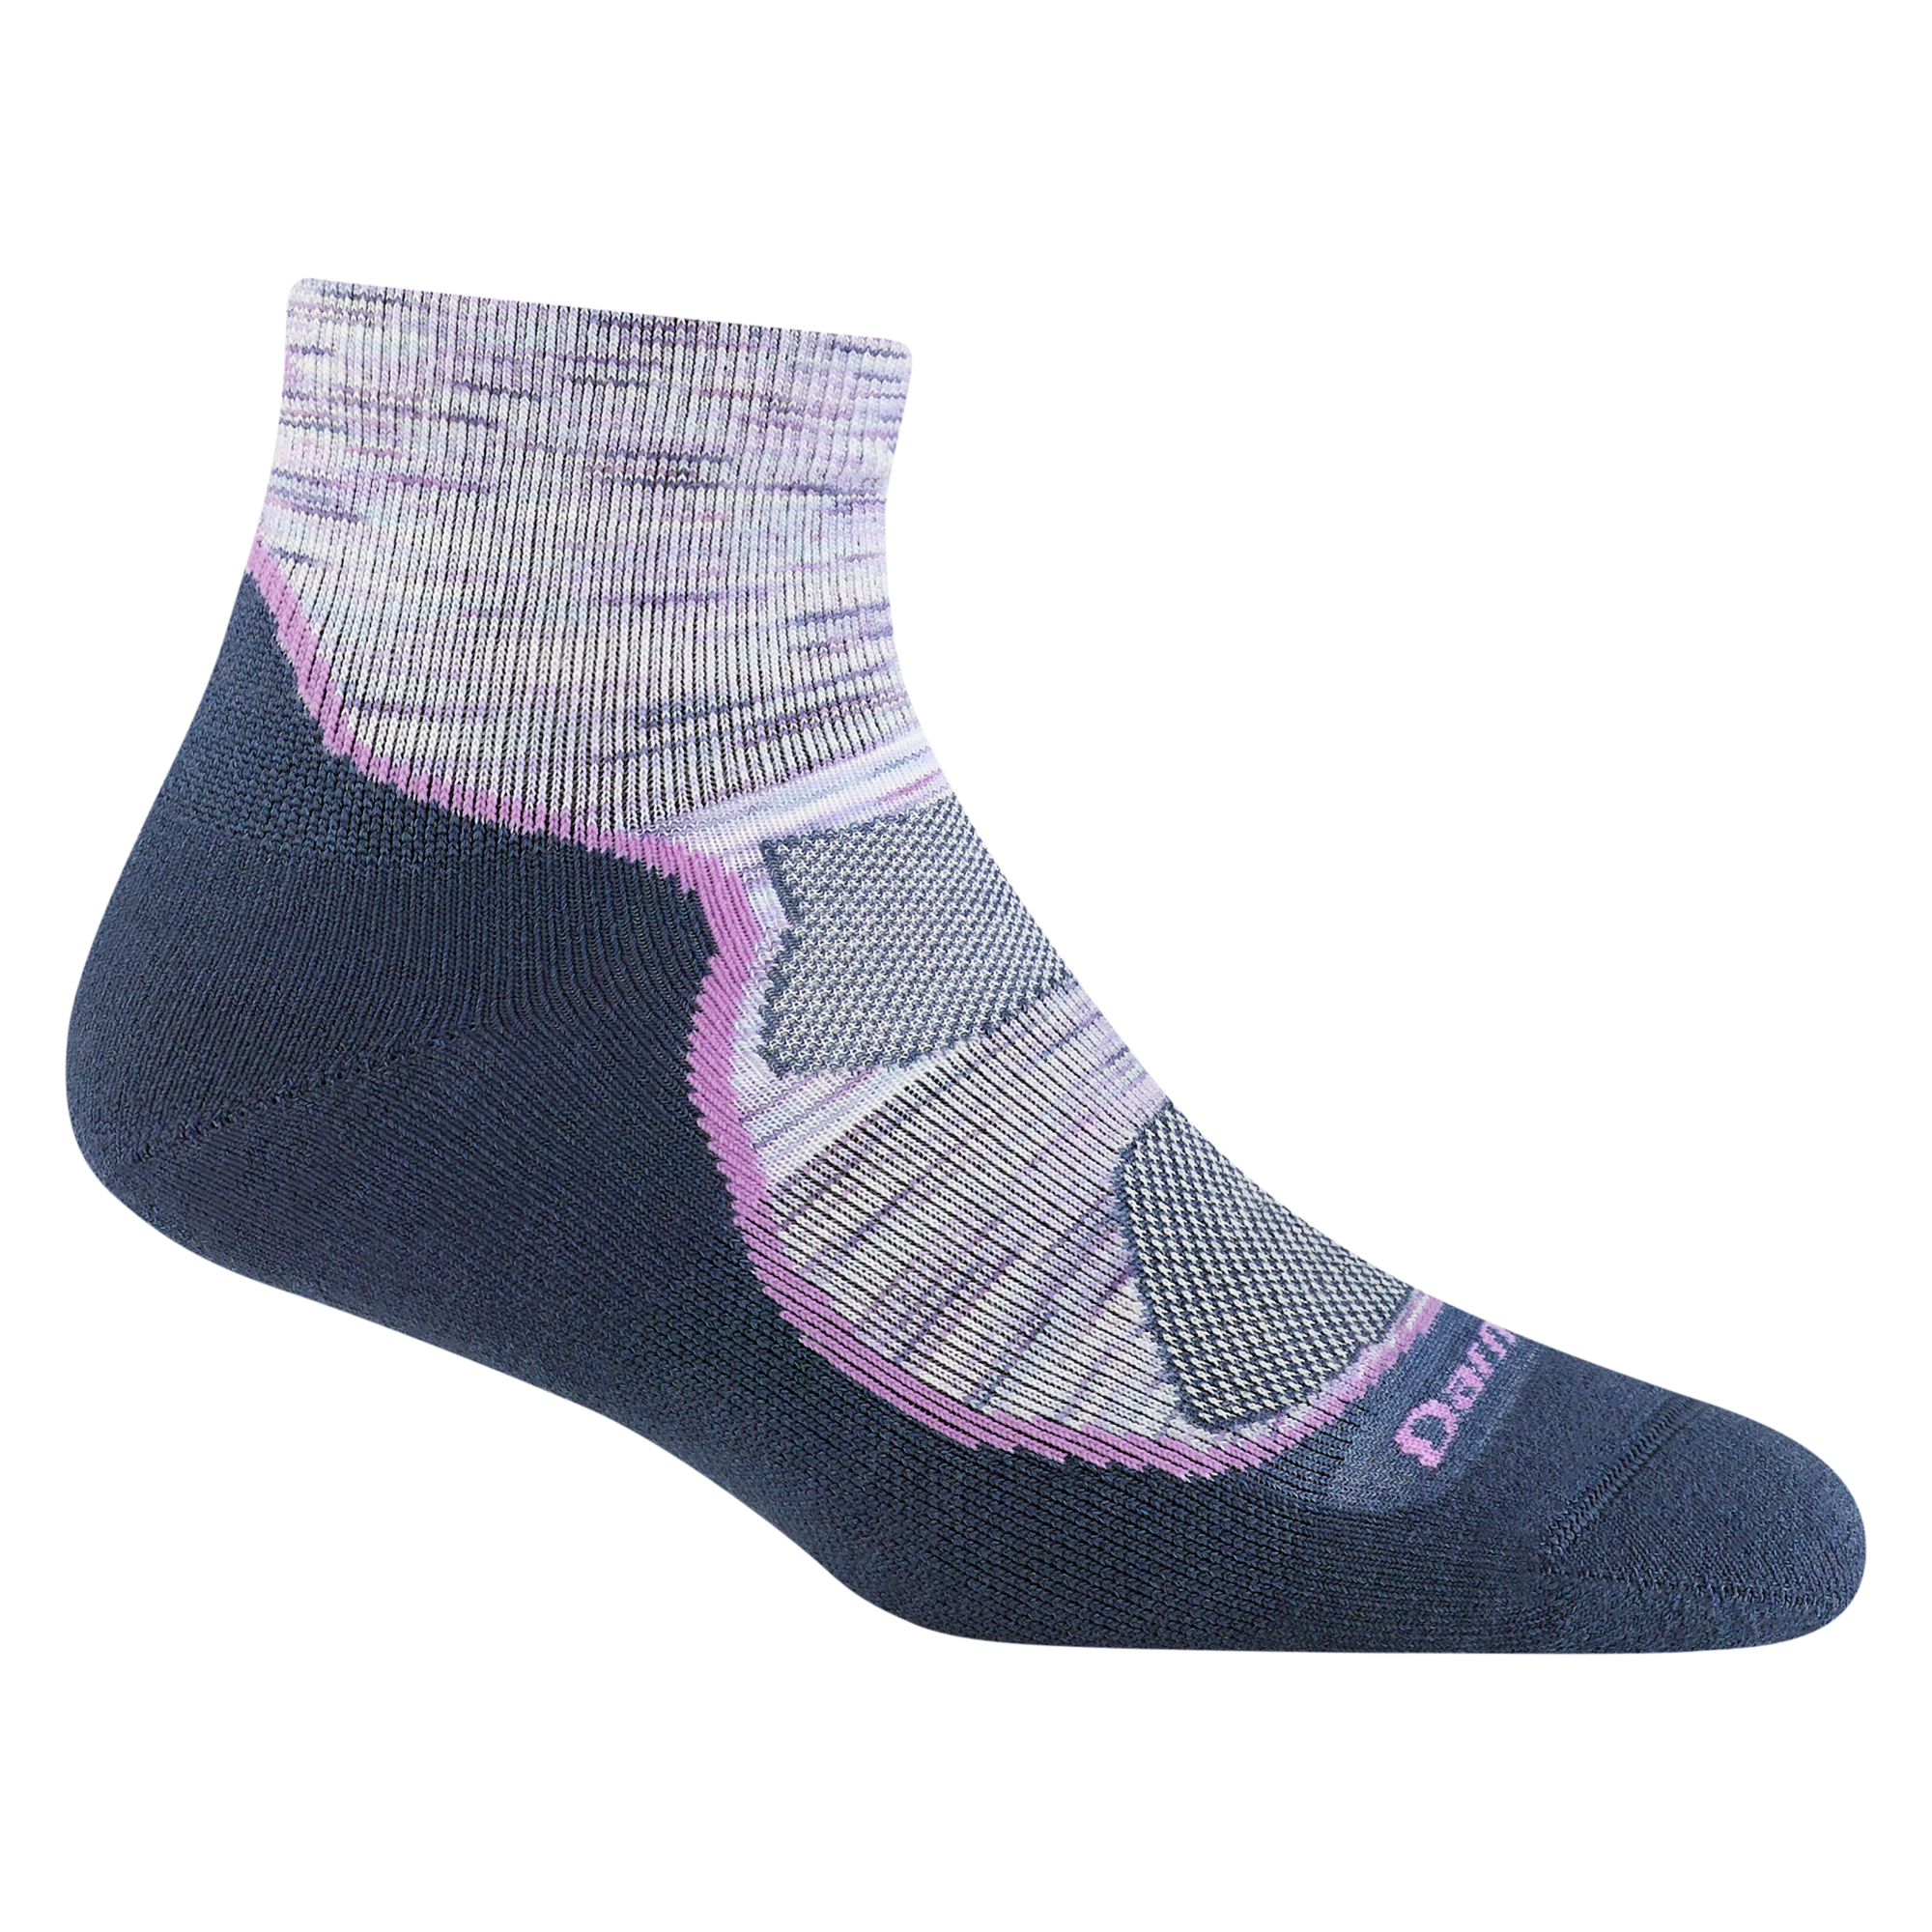 1987 women's light hiker quarter hiking sock in cosmic purple with navy underfoot accents and purple forefoot outline